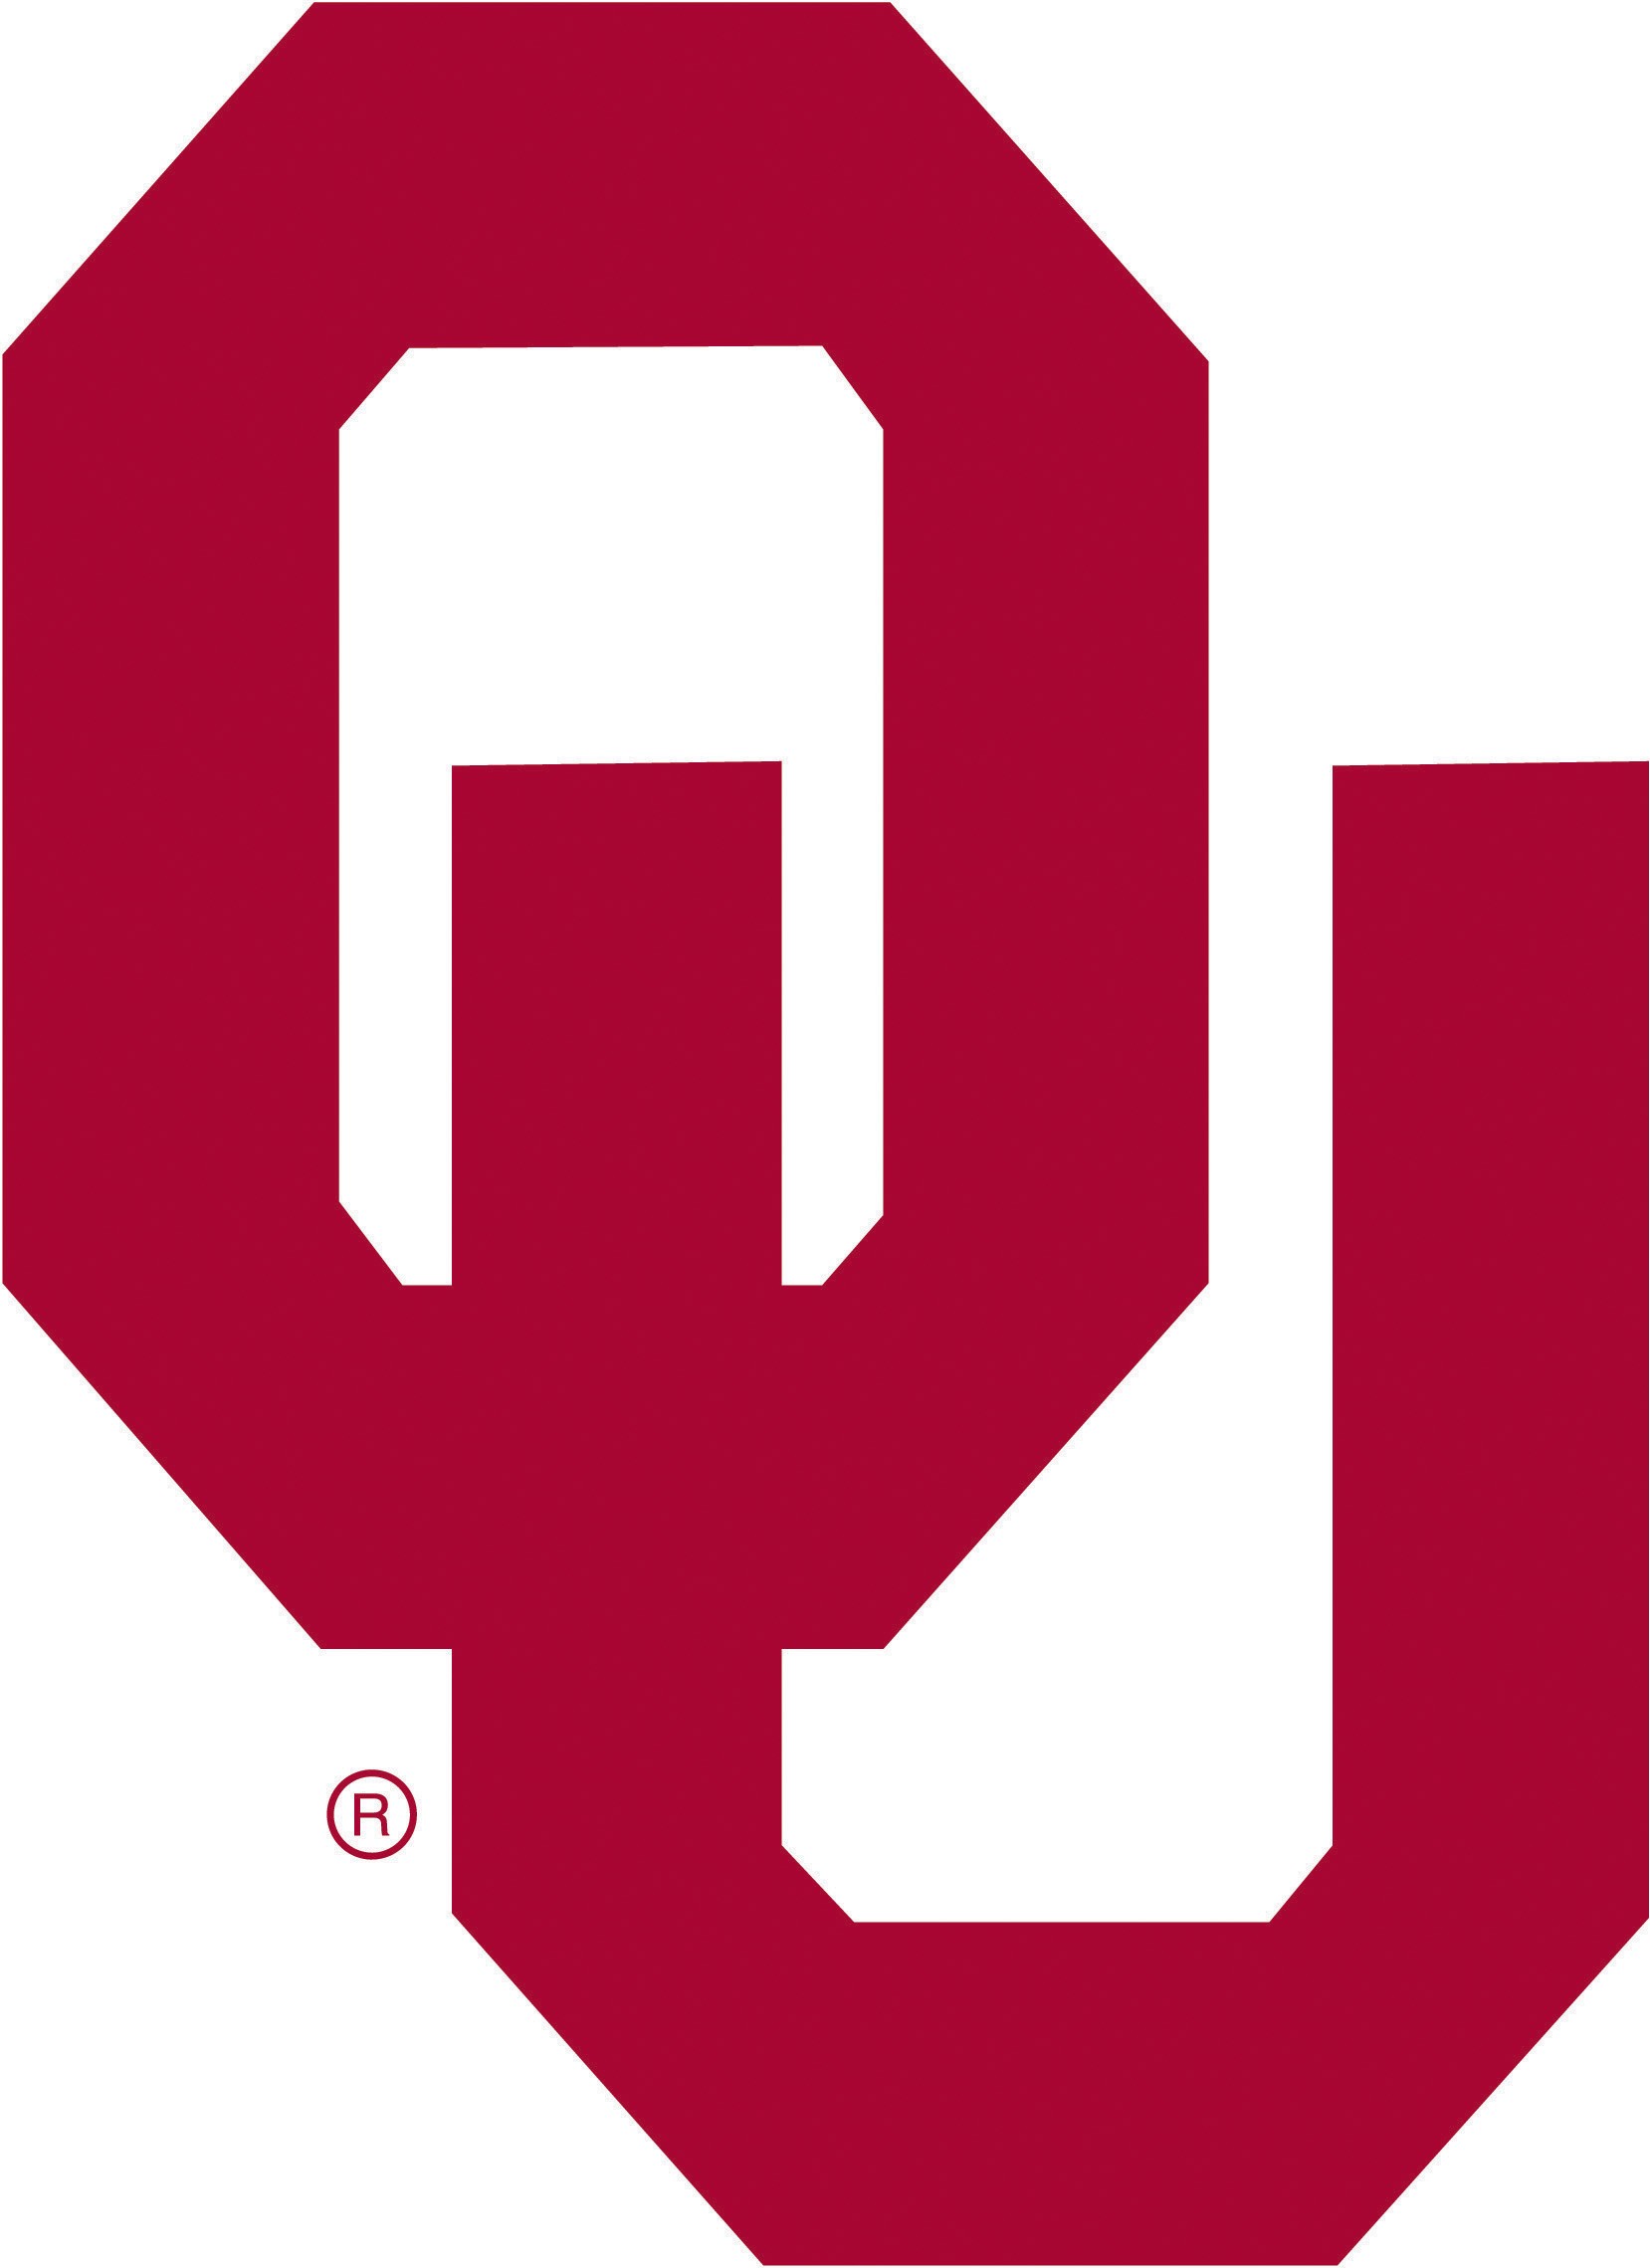 Tours offer students an inside look at the University of Oklahoma